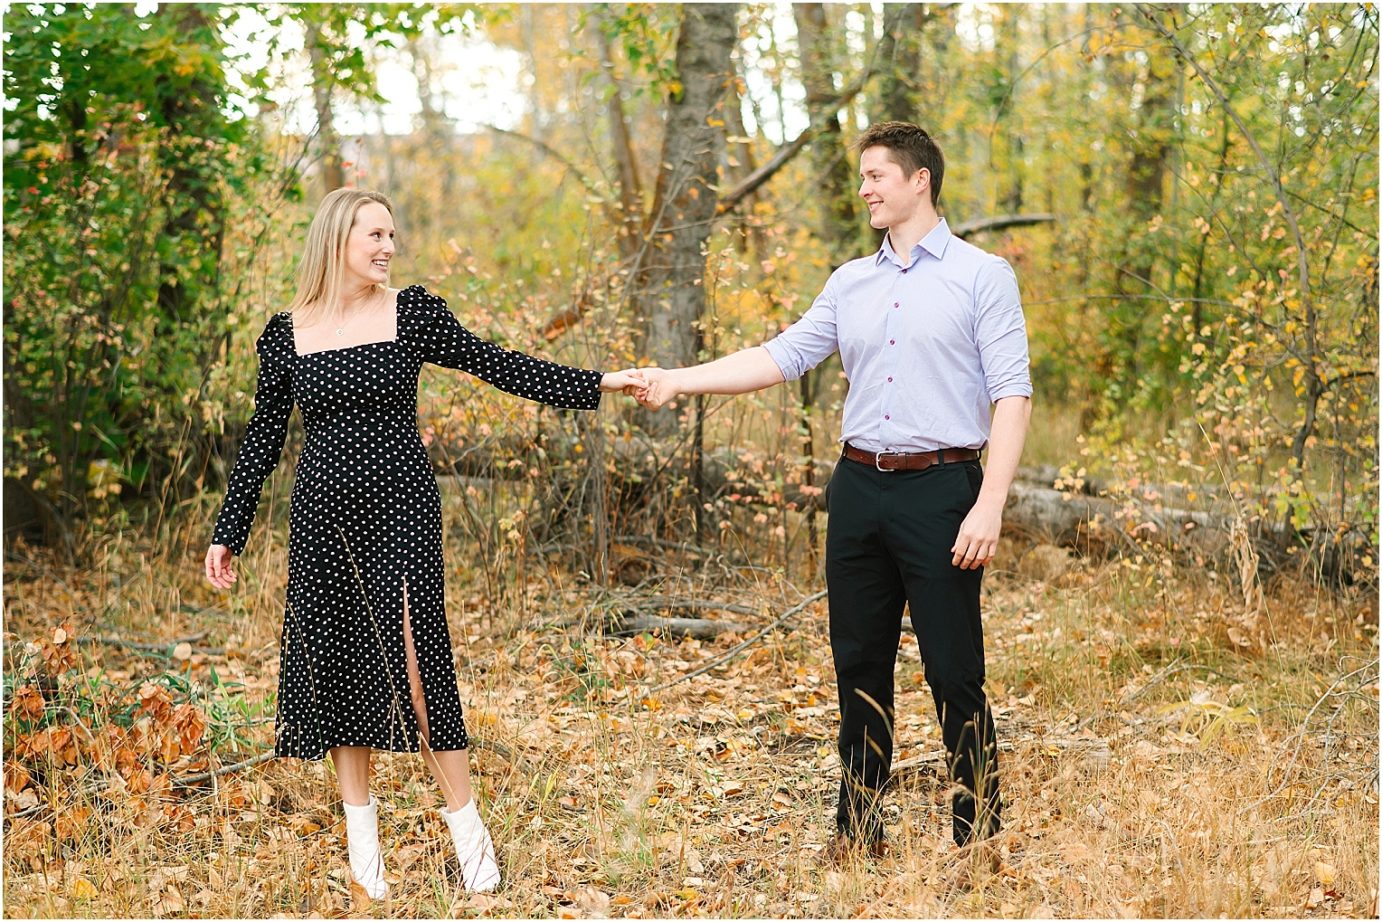 Joyful fall engagement session Cental WA Brad and Jasmine dancing in front of trees